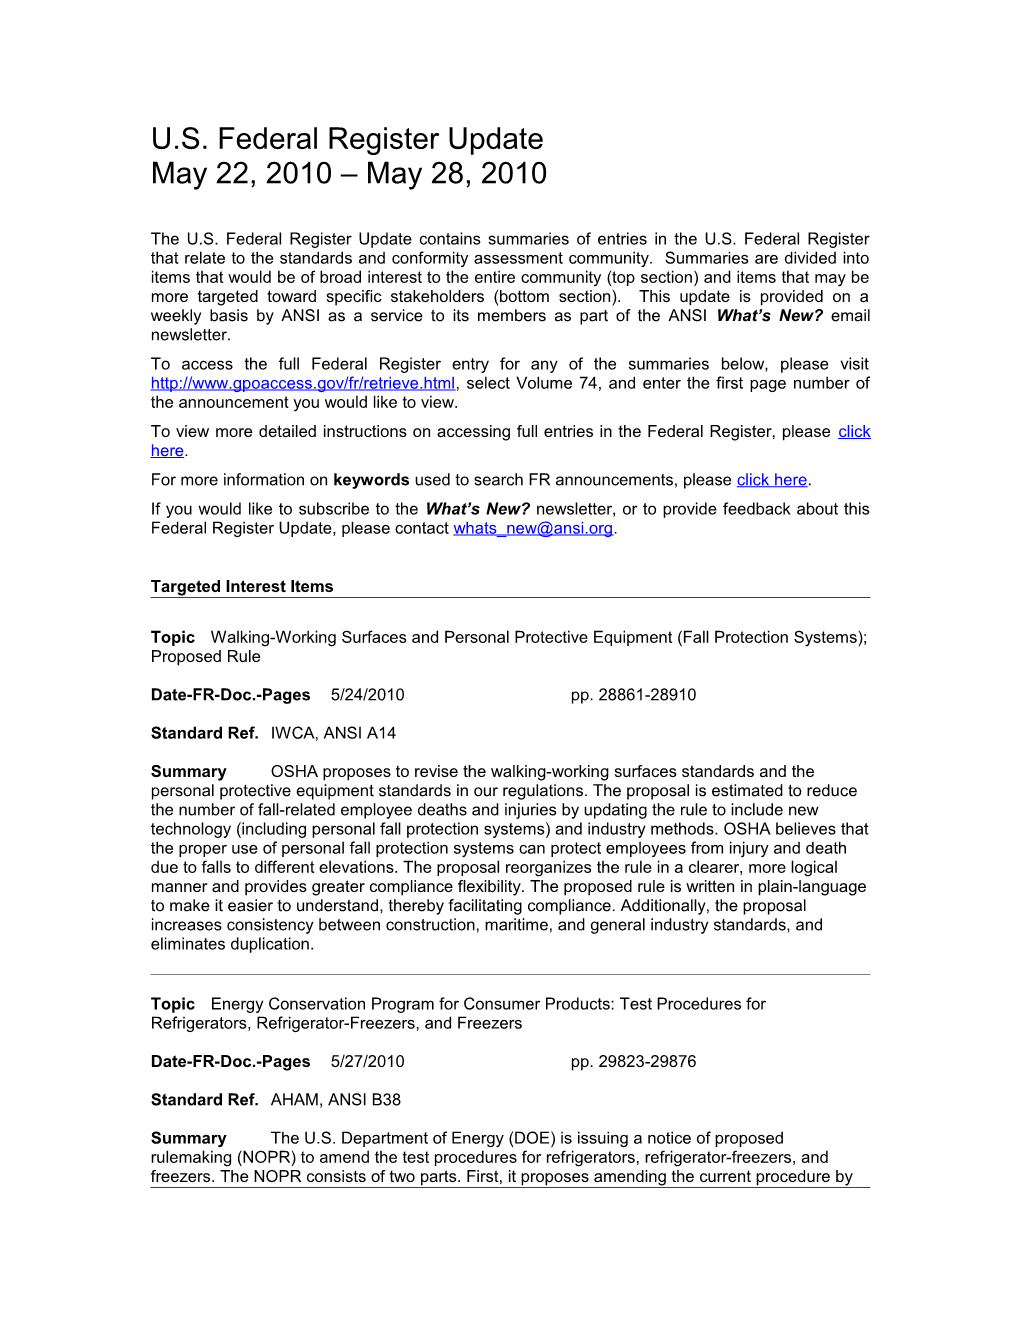 Standards and Trade Related Notices from the U.S. Federal Register, 05.28.2010